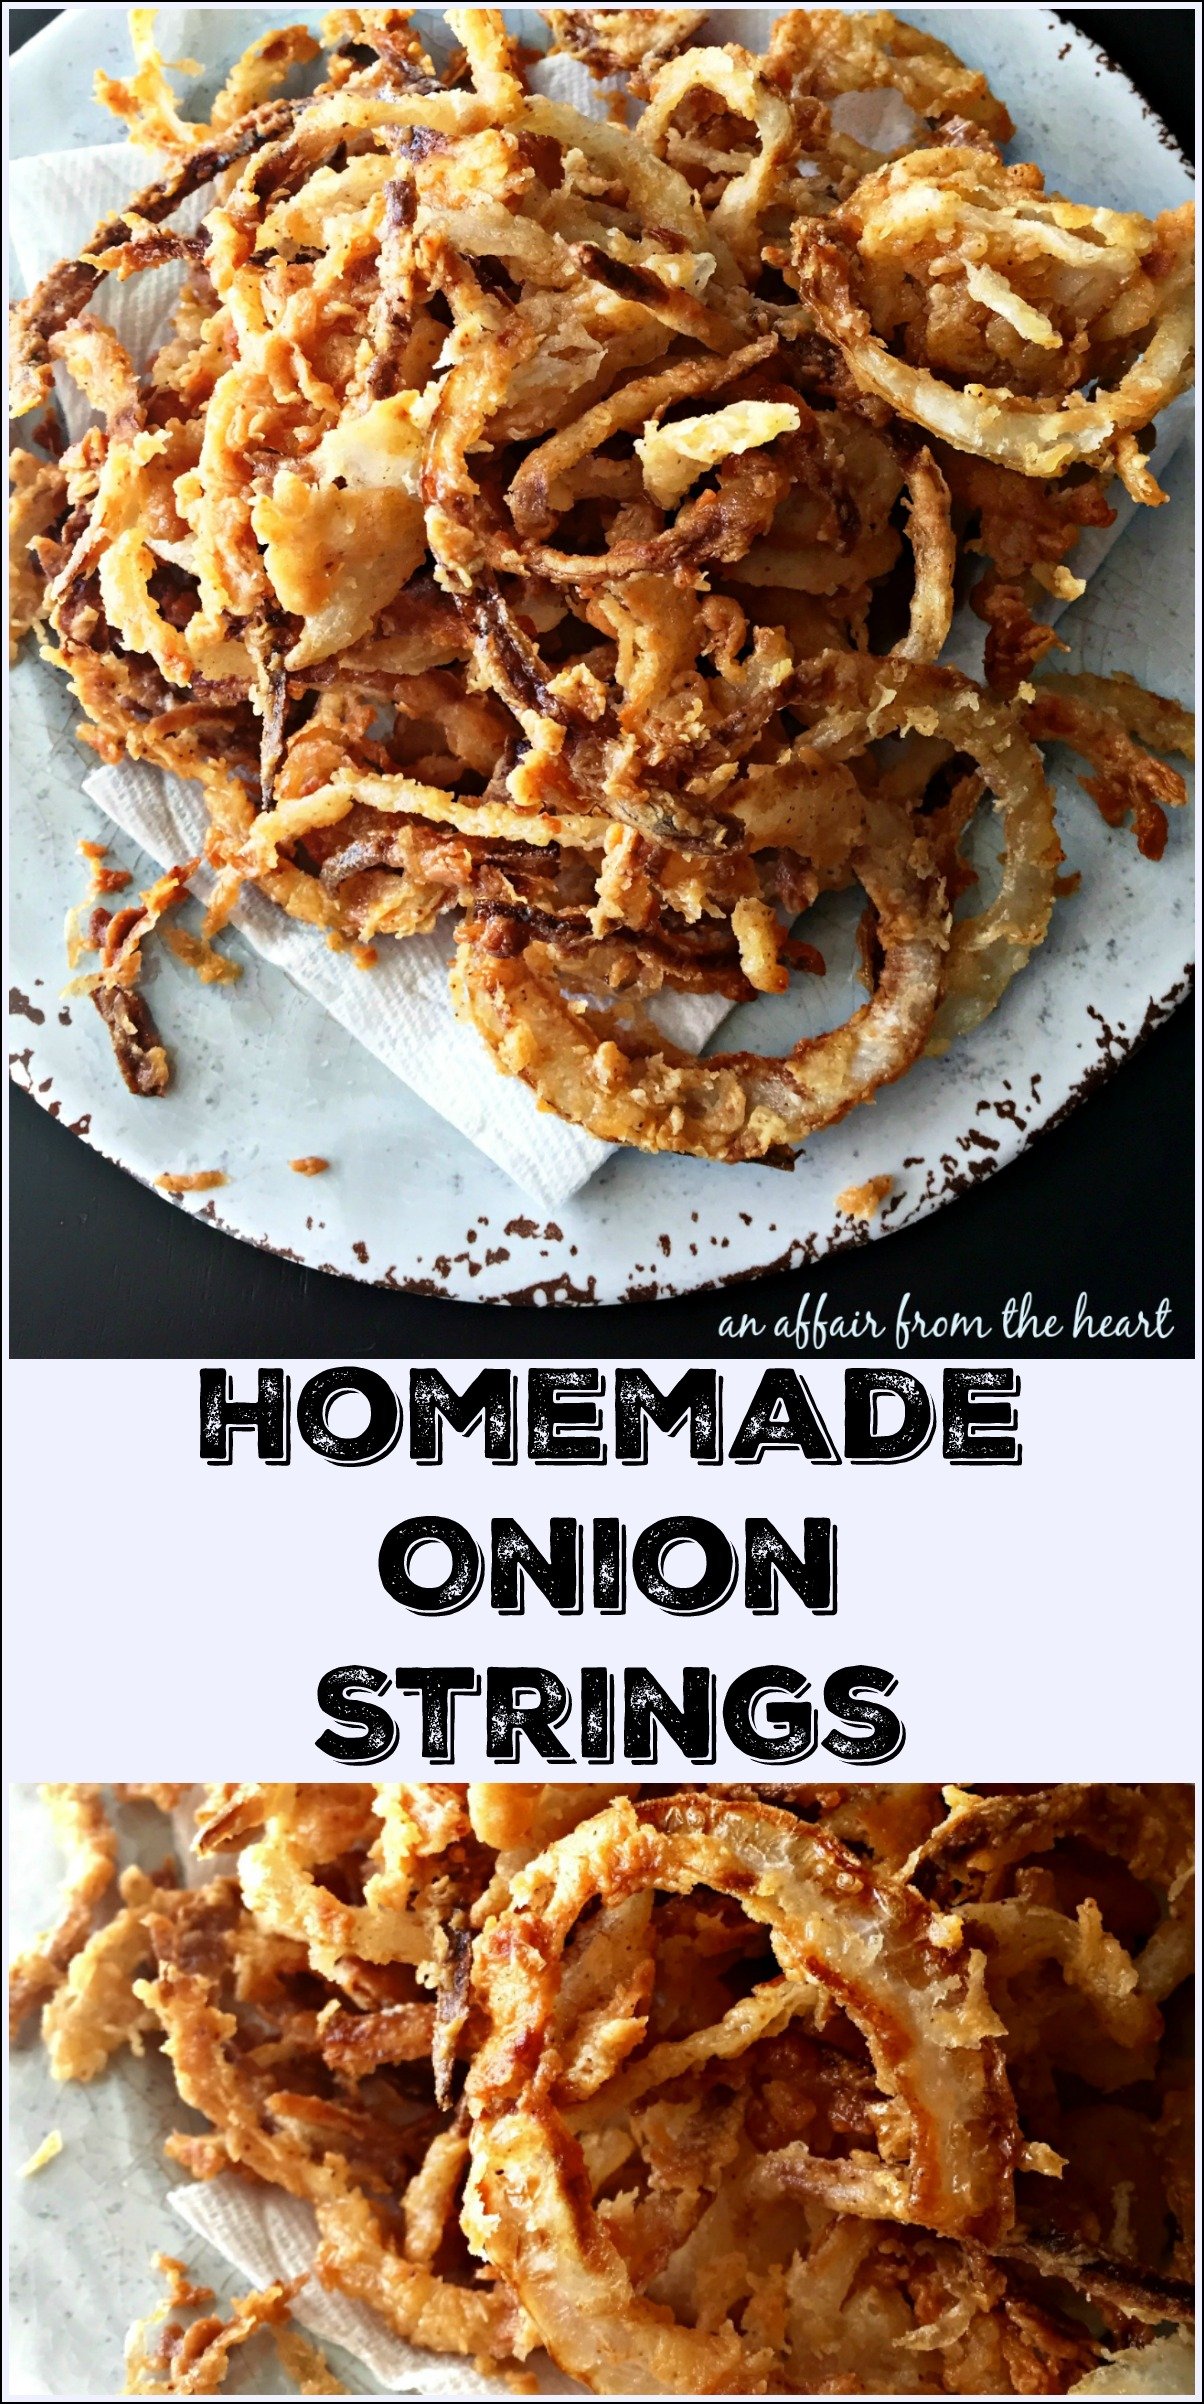 Homemade Onion Strings eat as an appetizer or use as a topping